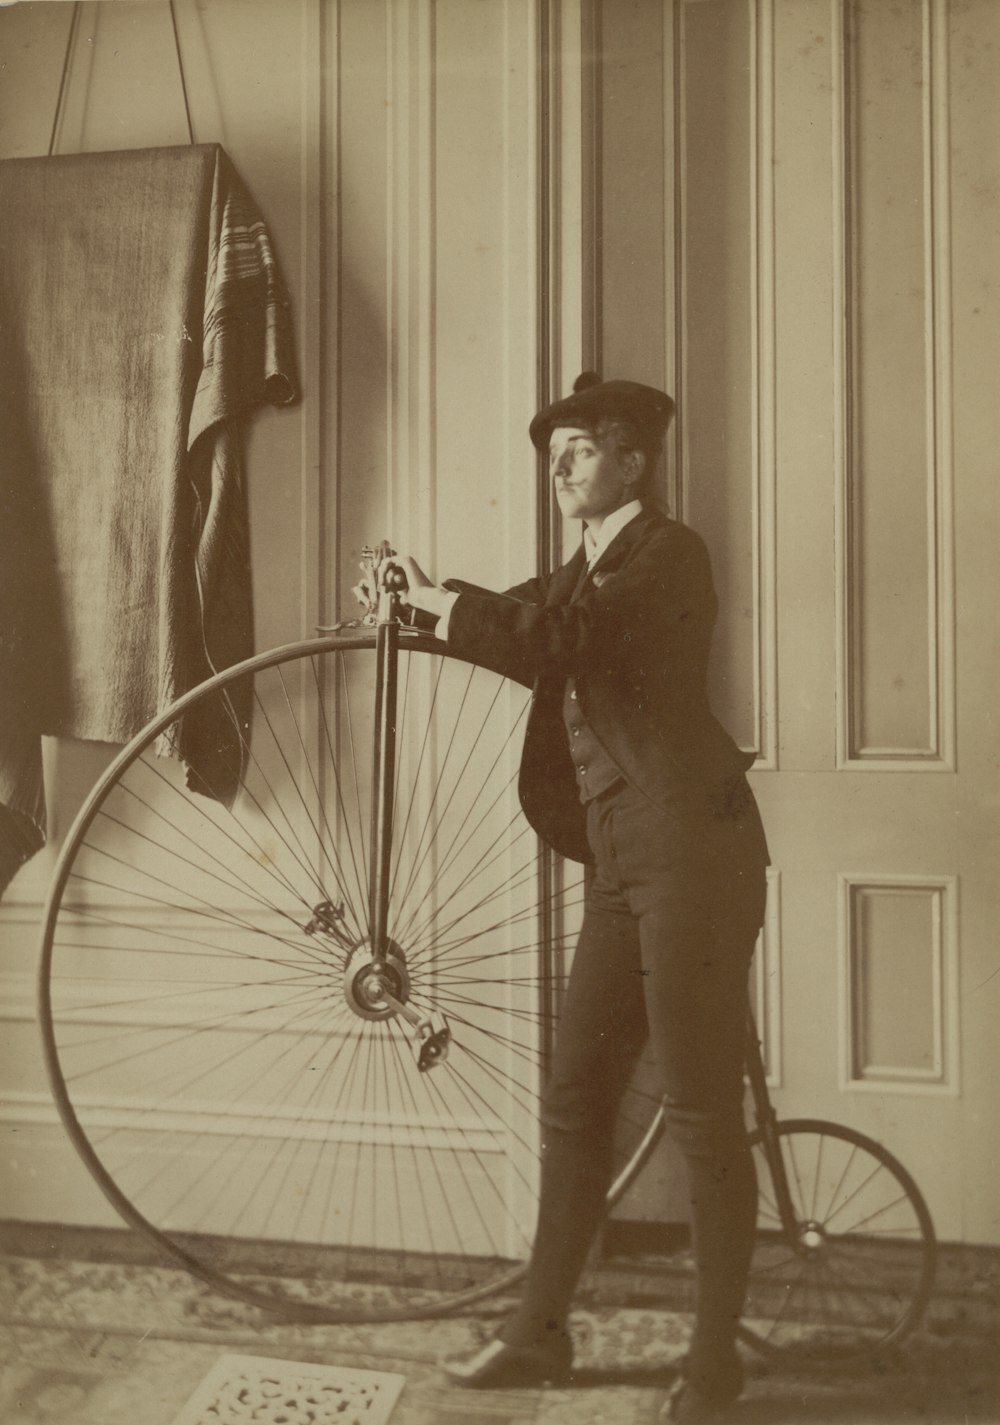 Frances Benjamin Johnston, posed with bicycle